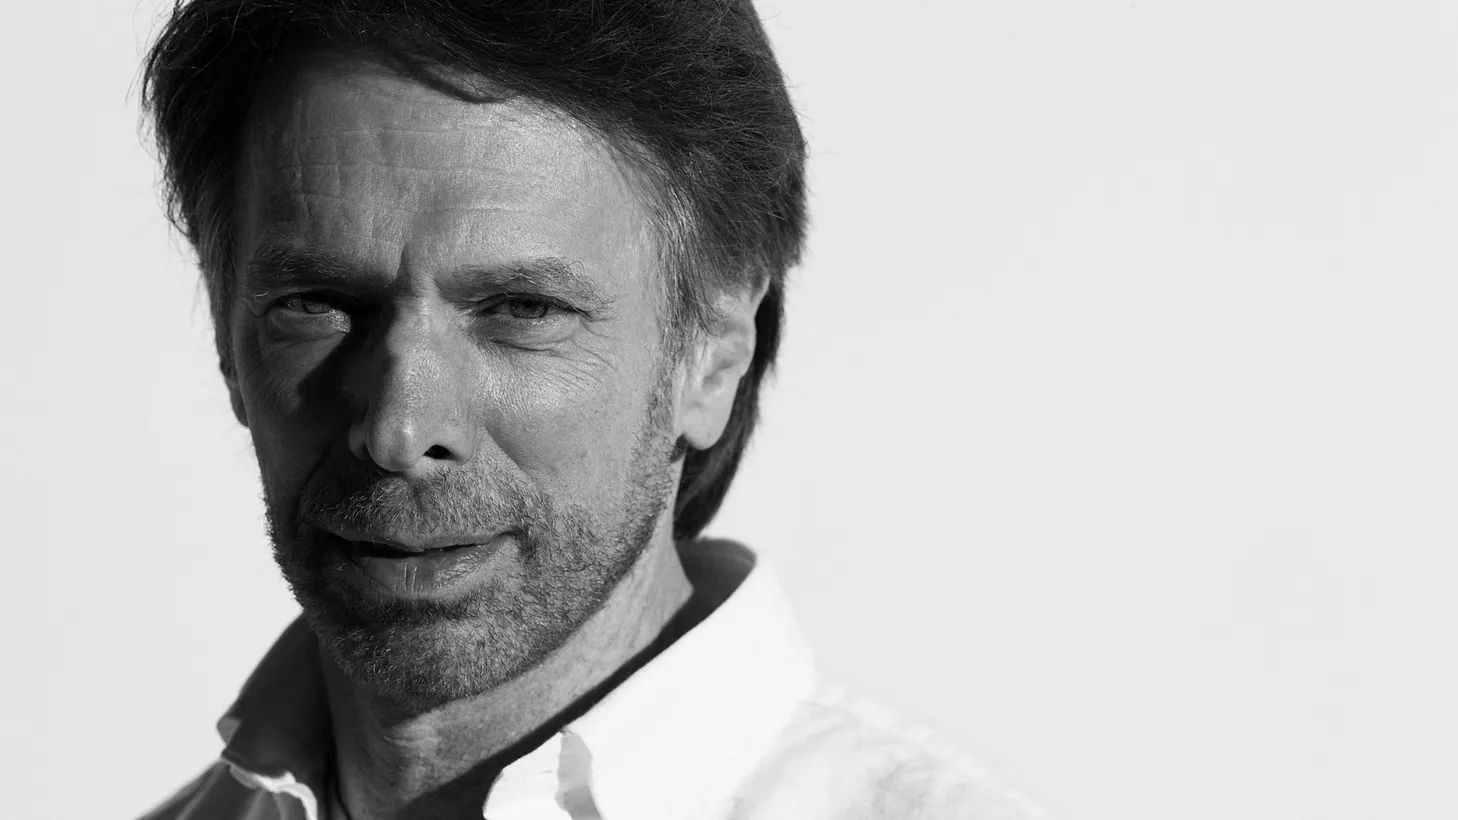 Co-owning the Seattle Kraken hockey team “is not as stressful as the movie or the television business, so I get great thrills every time we have a win,” says producer Jerry Bruckheimer. “That is enjoyment and something that I've been dreaming about ever since I was a little kid.”